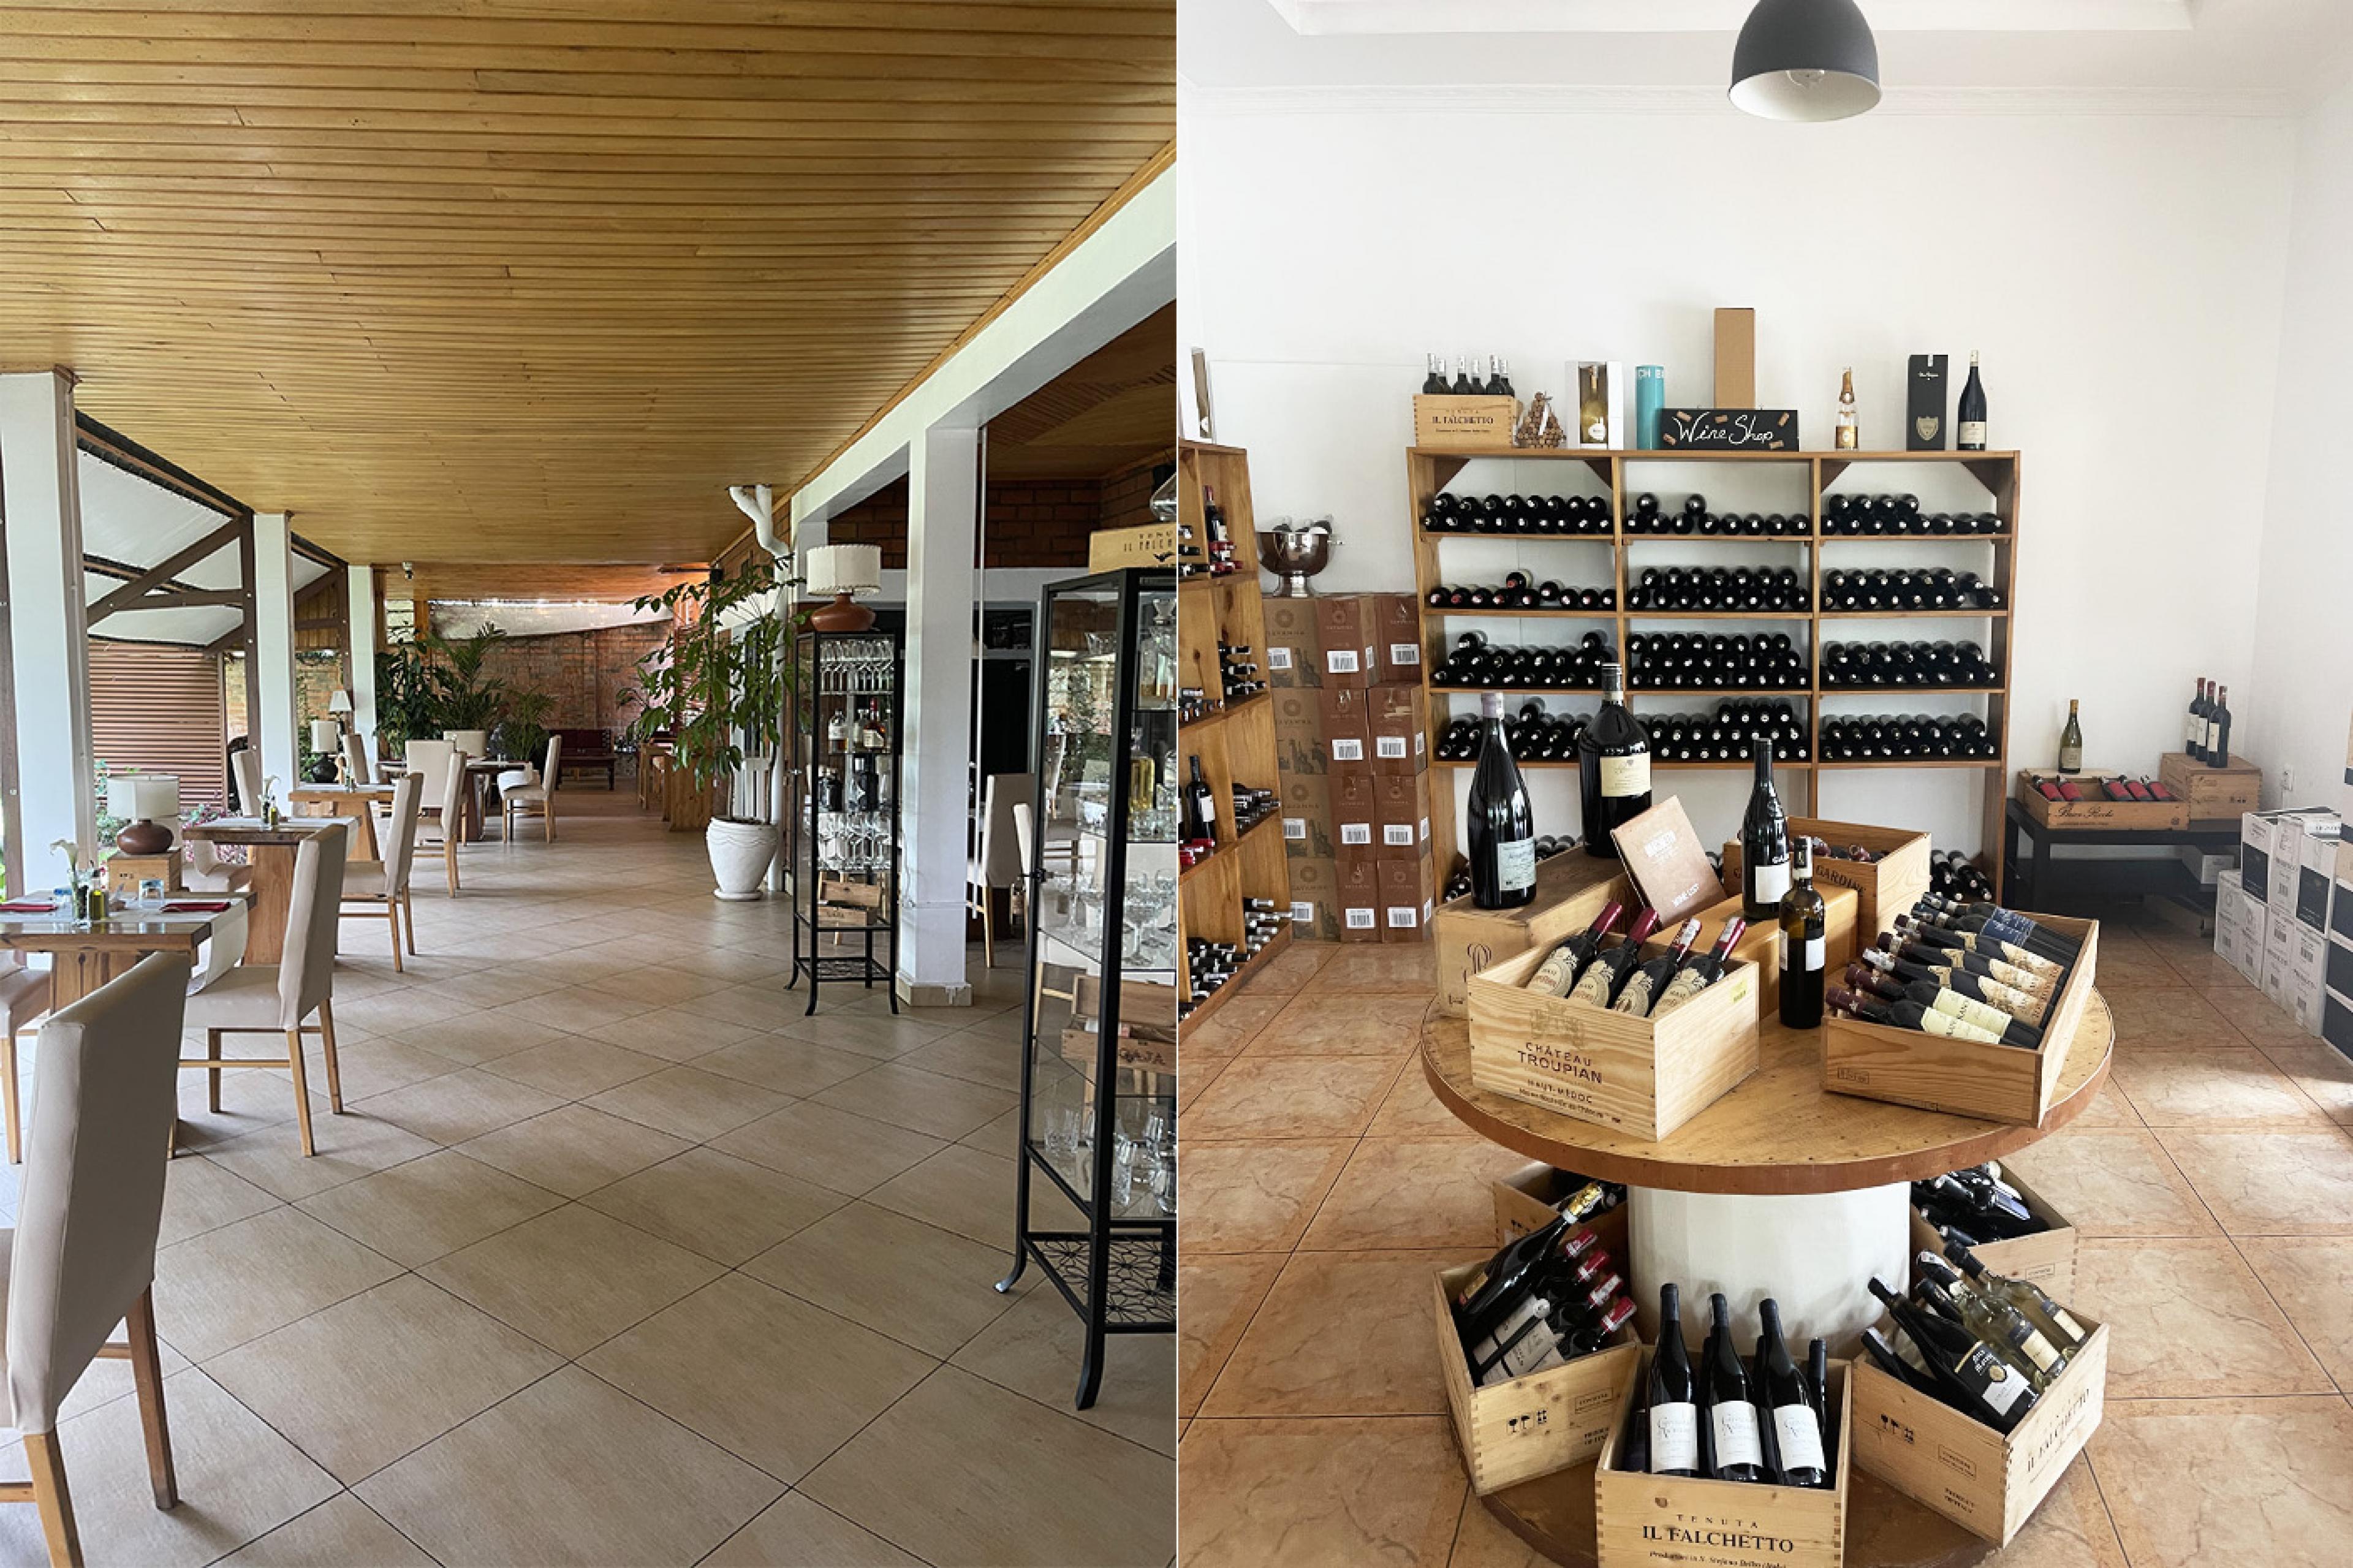 spacious restaurant and a wine shop